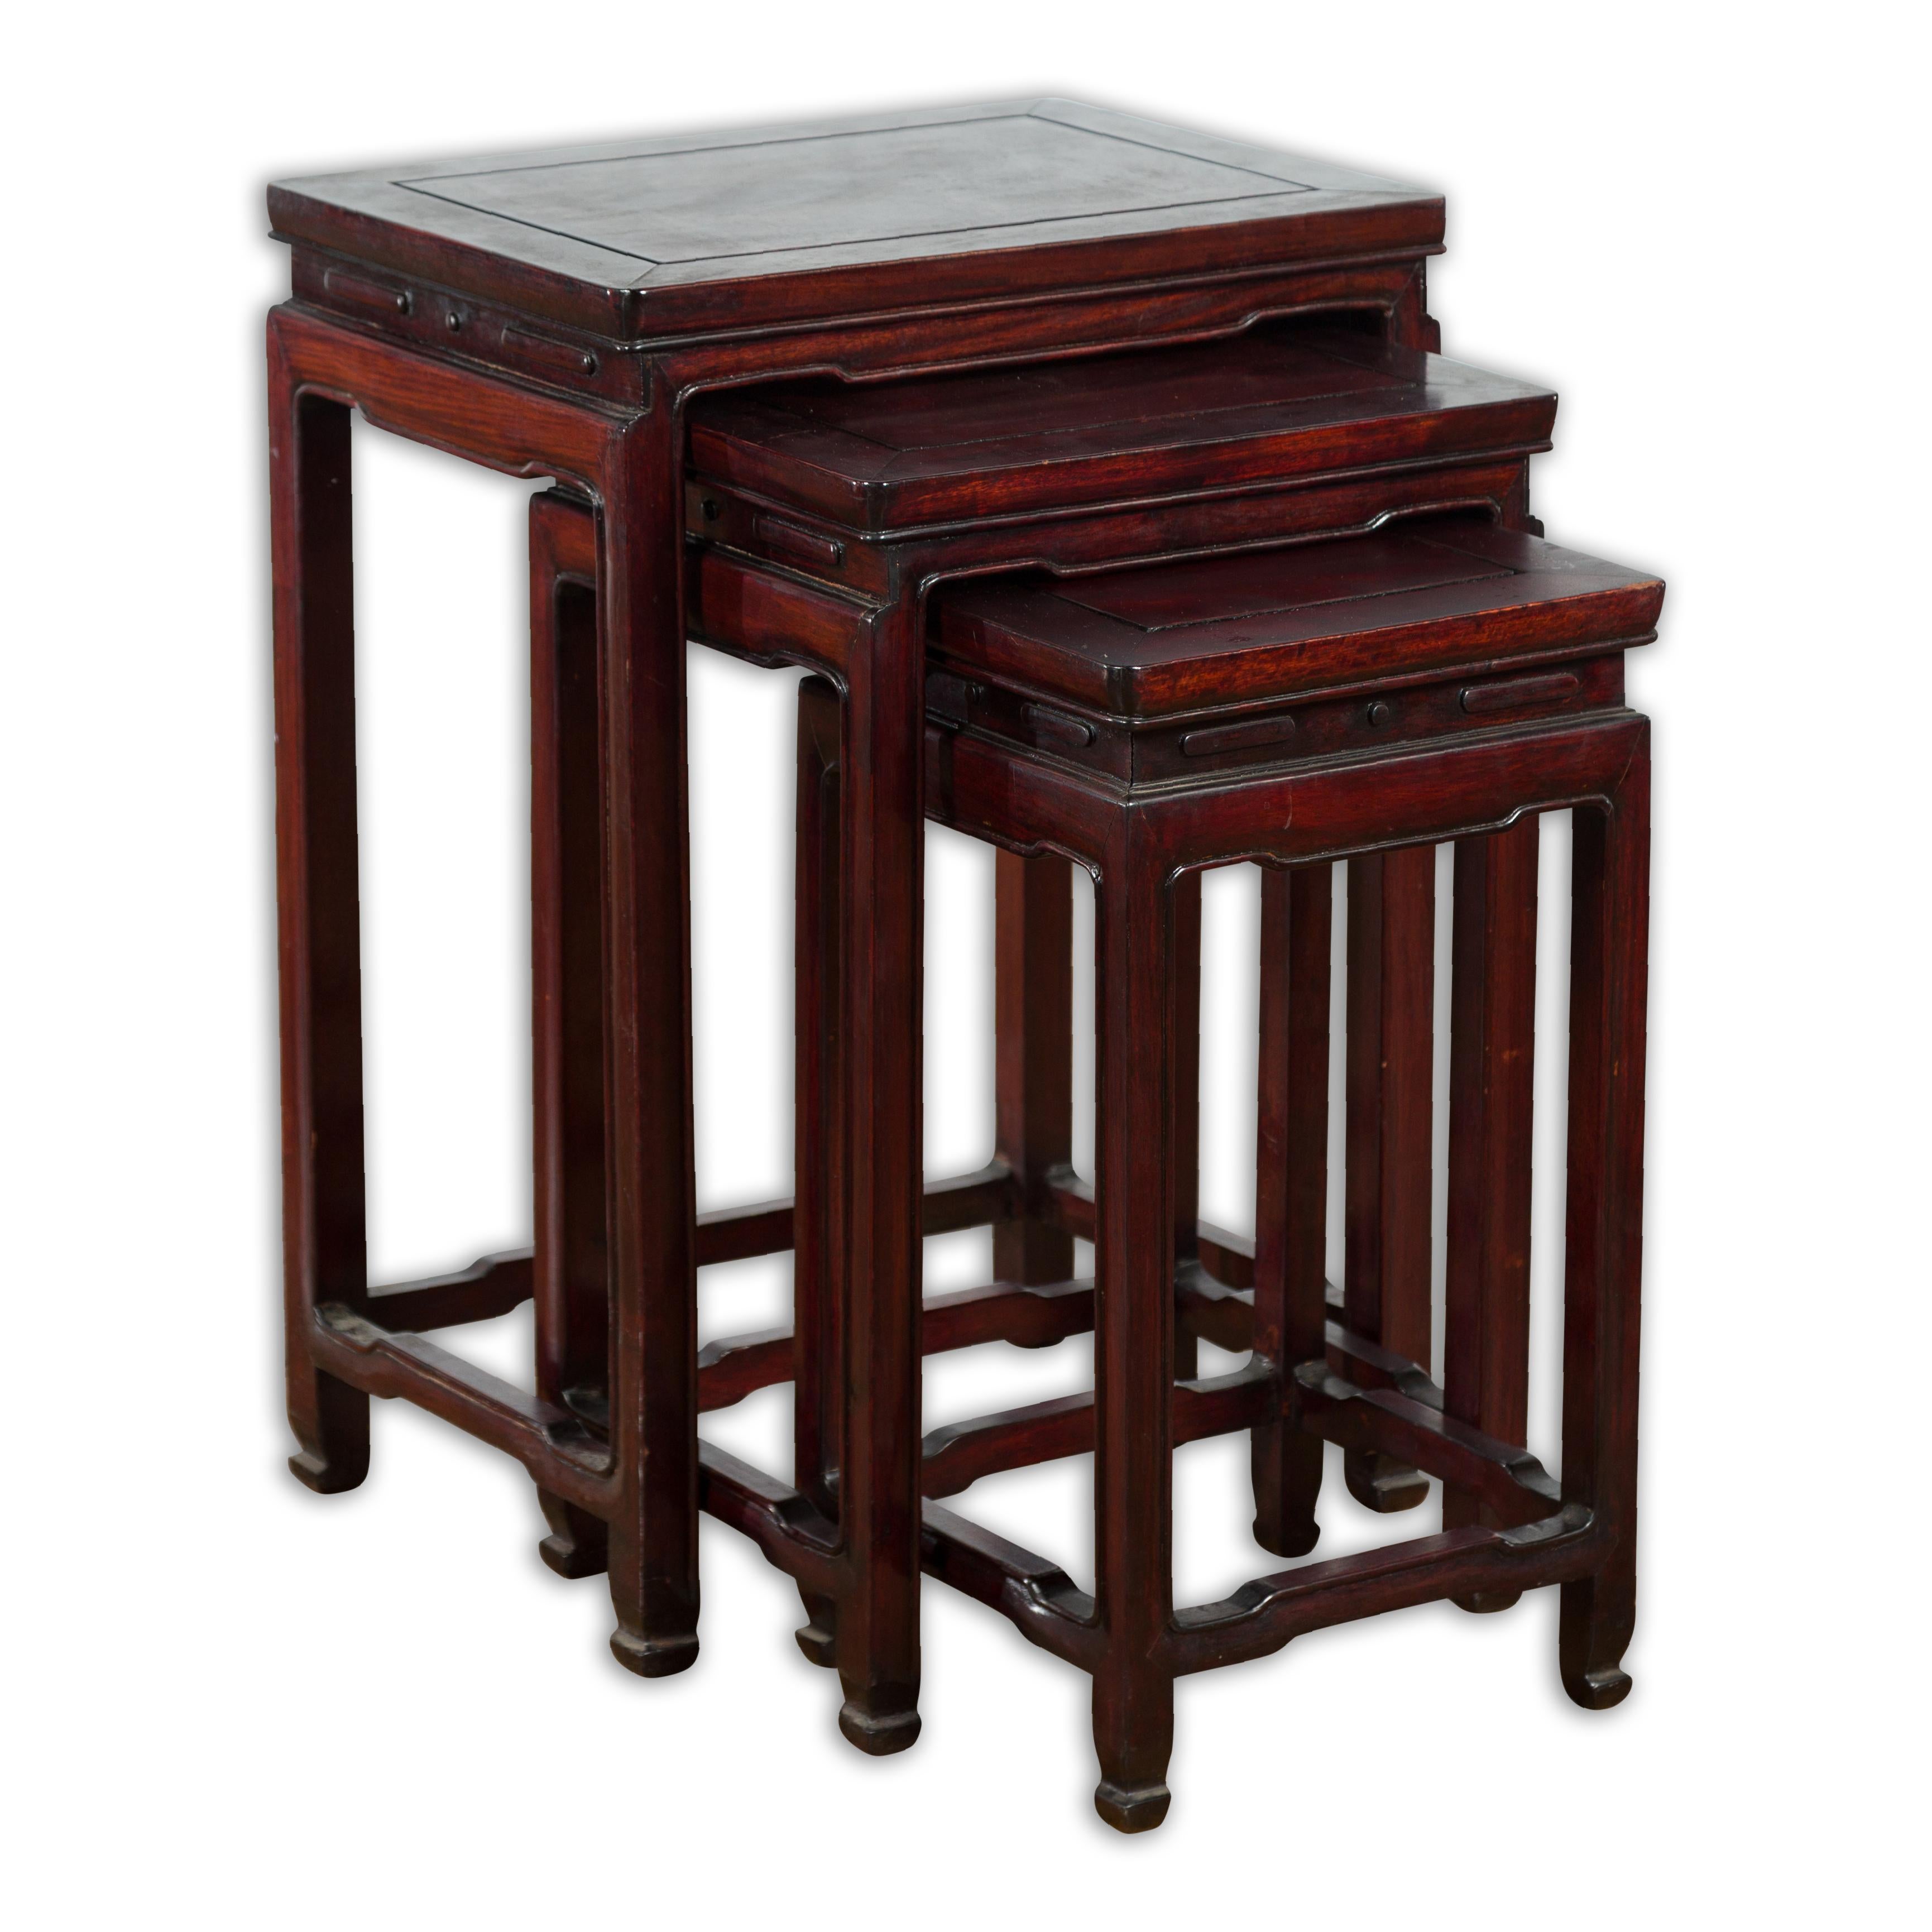 Set of Three Chinese Vintage Rosewood Nesting Tables with Reddish Brown Patina For Sale 4